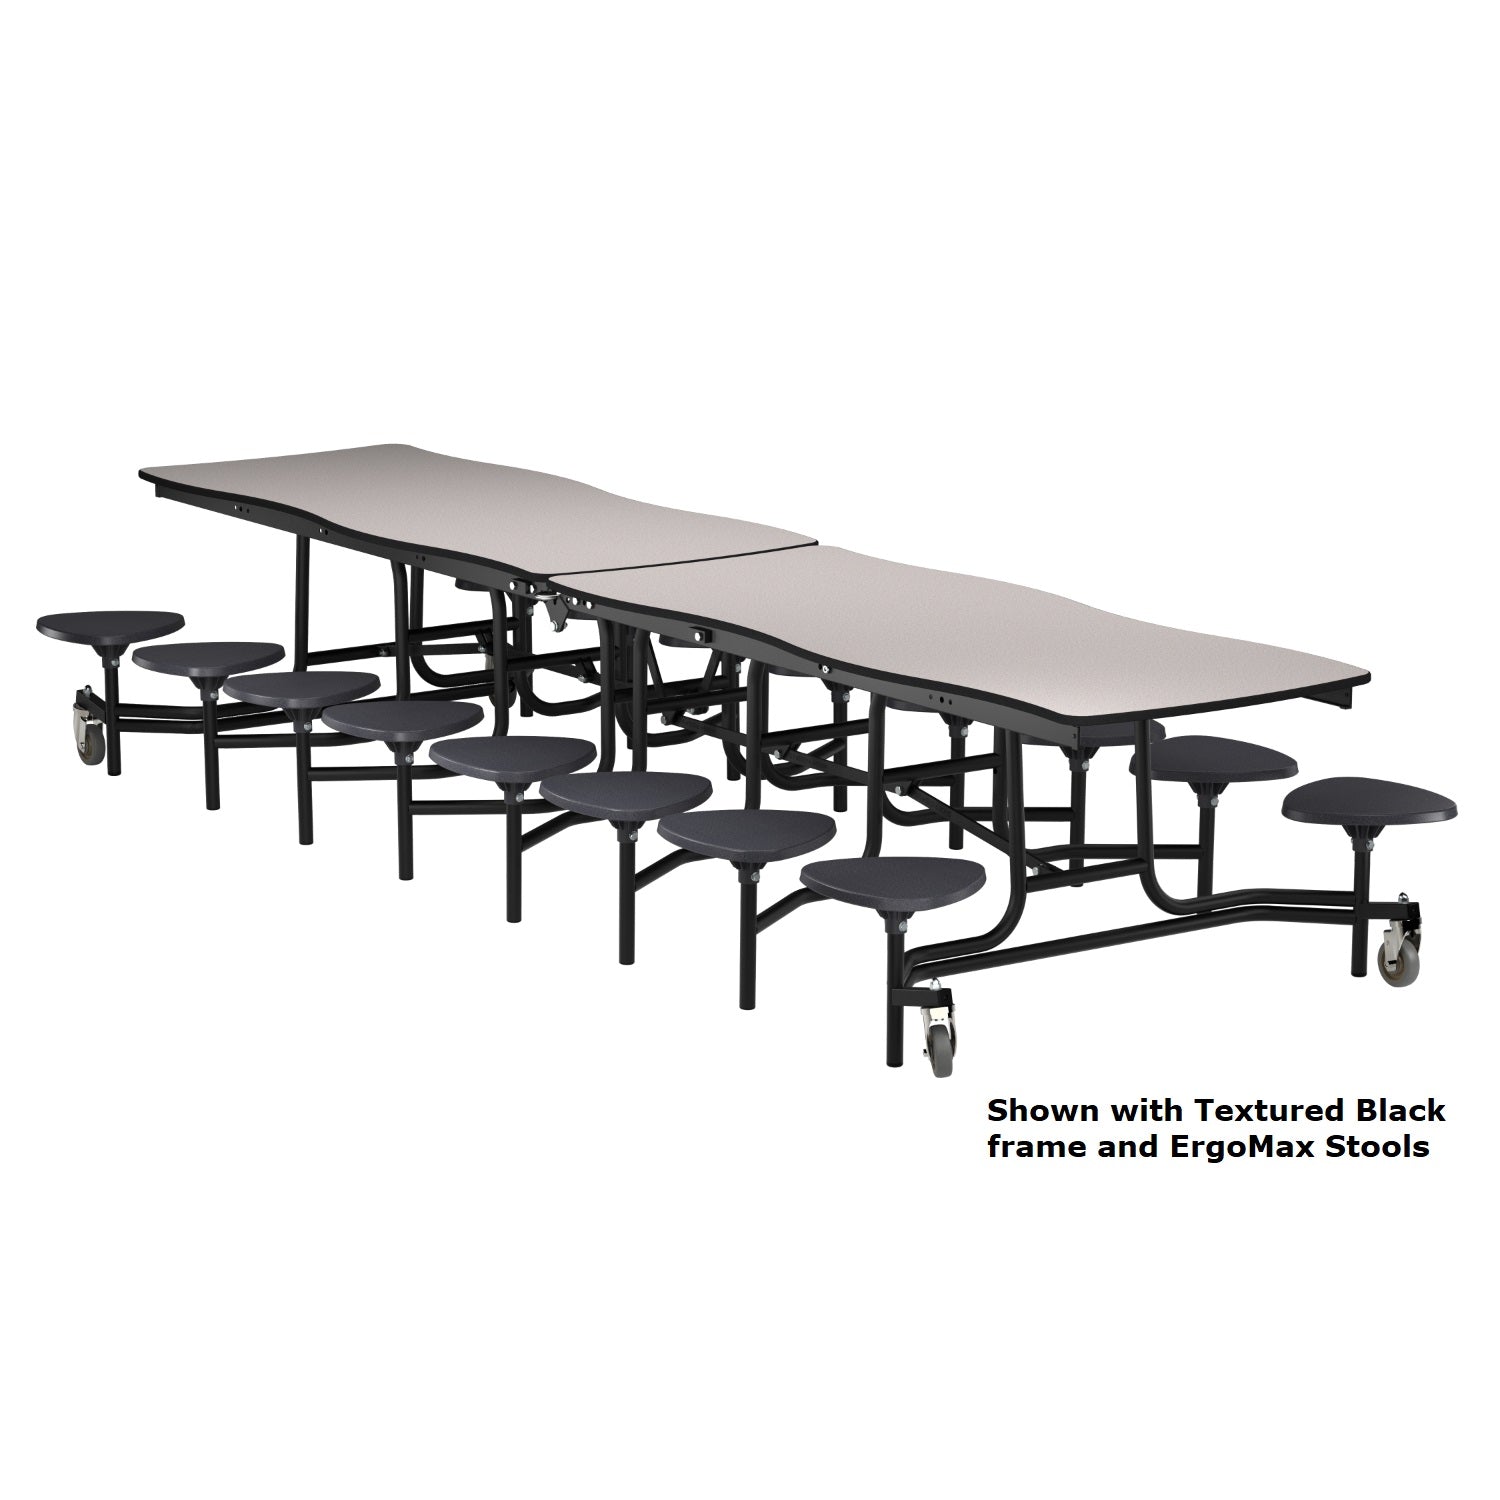 Mobile Cafeteria Table with 16 Stools, 12' Swerve, Plywood Core, Vinyl T-Mold Edge, Textured Black Frame